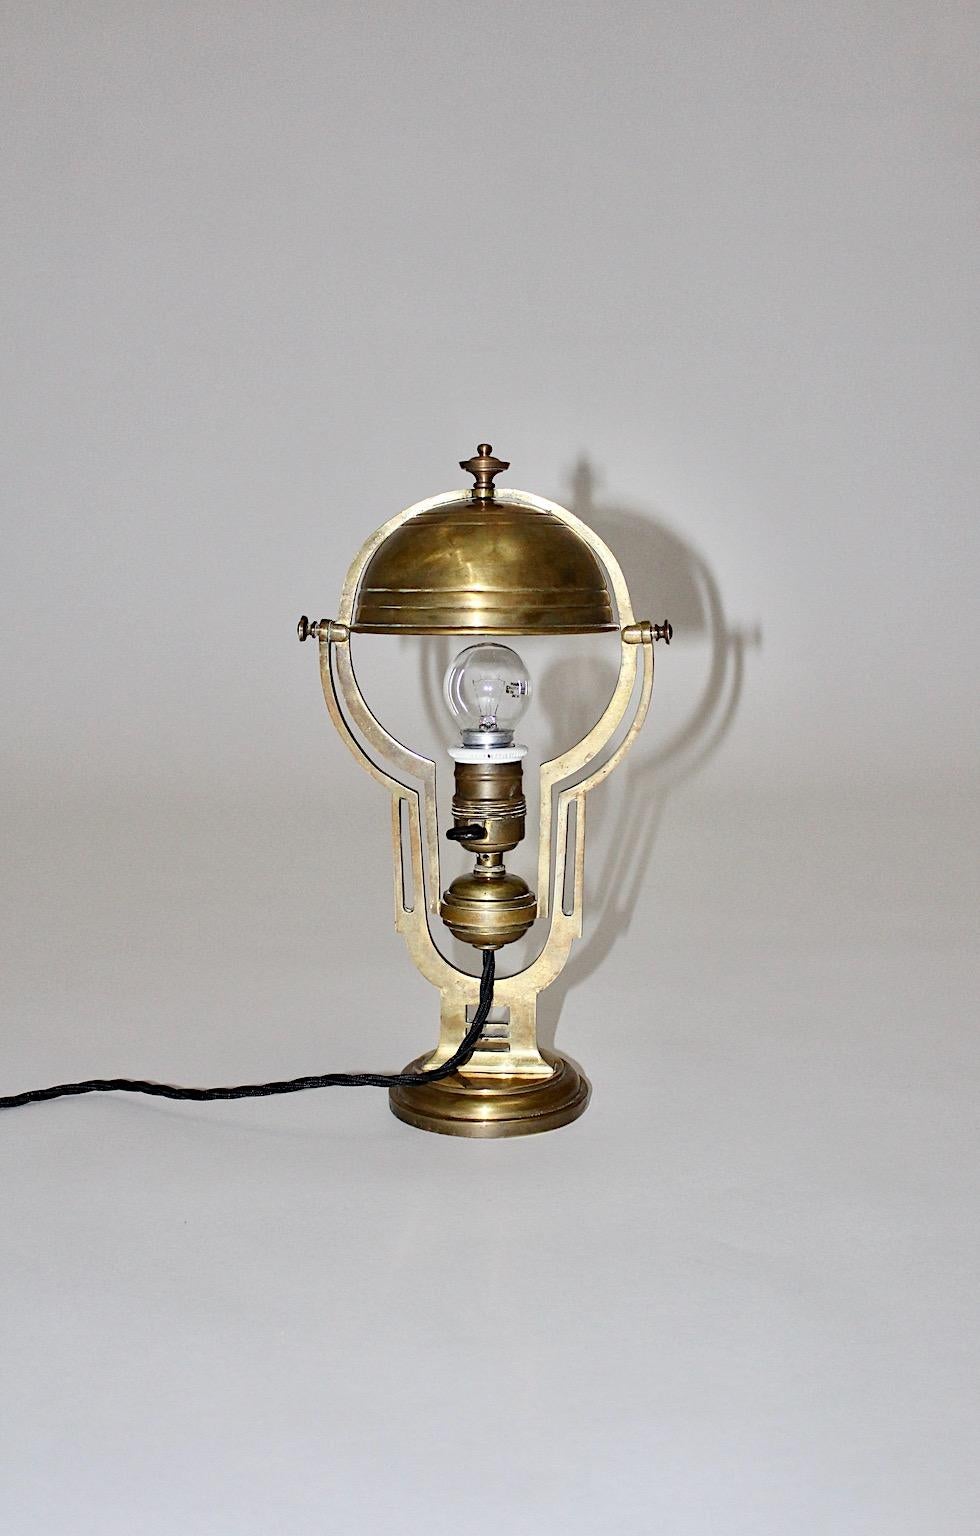 An Art Nouveau vintage solid brass table lamp, which was designed and manufactured circa 1900 in Austria.
The table lamp shows an adjustable dome shade. While the table lamp is rewired it features an original switch at the E 27 socket.
Very good